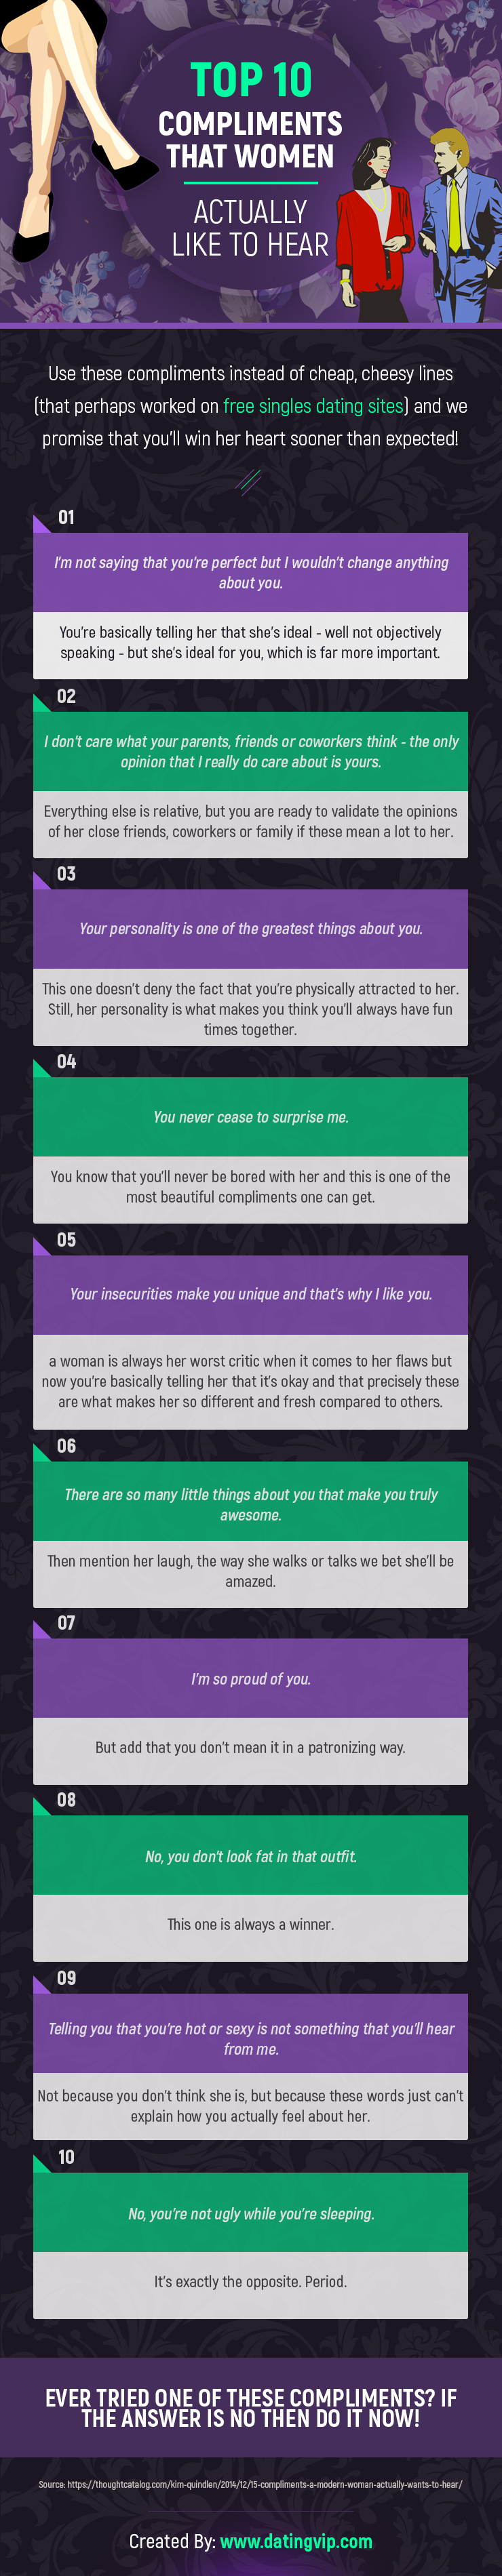 Top 10 Compliments that Women Actually Like to Hear